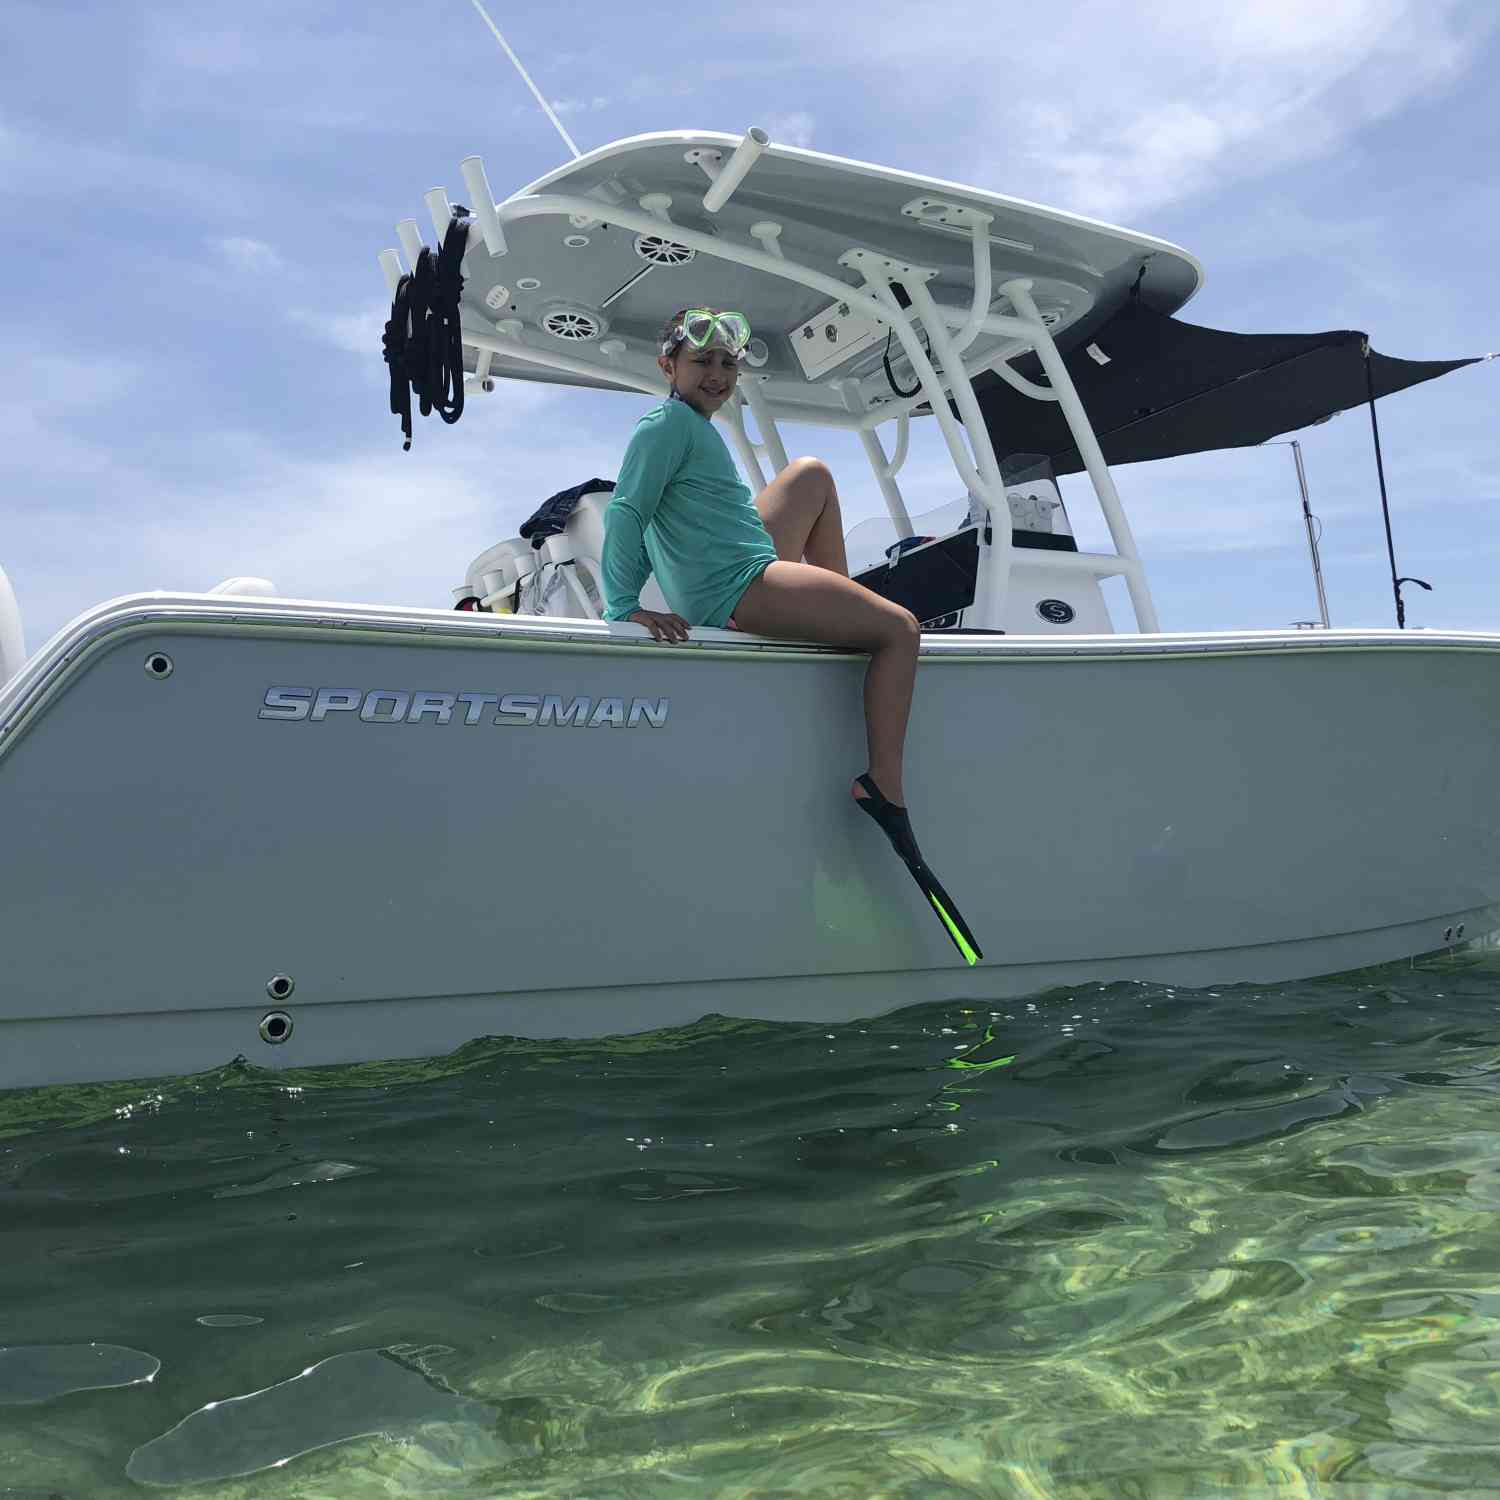 Title: Summer 2018...Oooohhh Yeah!!!! - On board their Sportsman Heritage 241 Center Console - Location: Key Largo, Florida. Participating in the Photo Contest #SportsmanSeptember2018